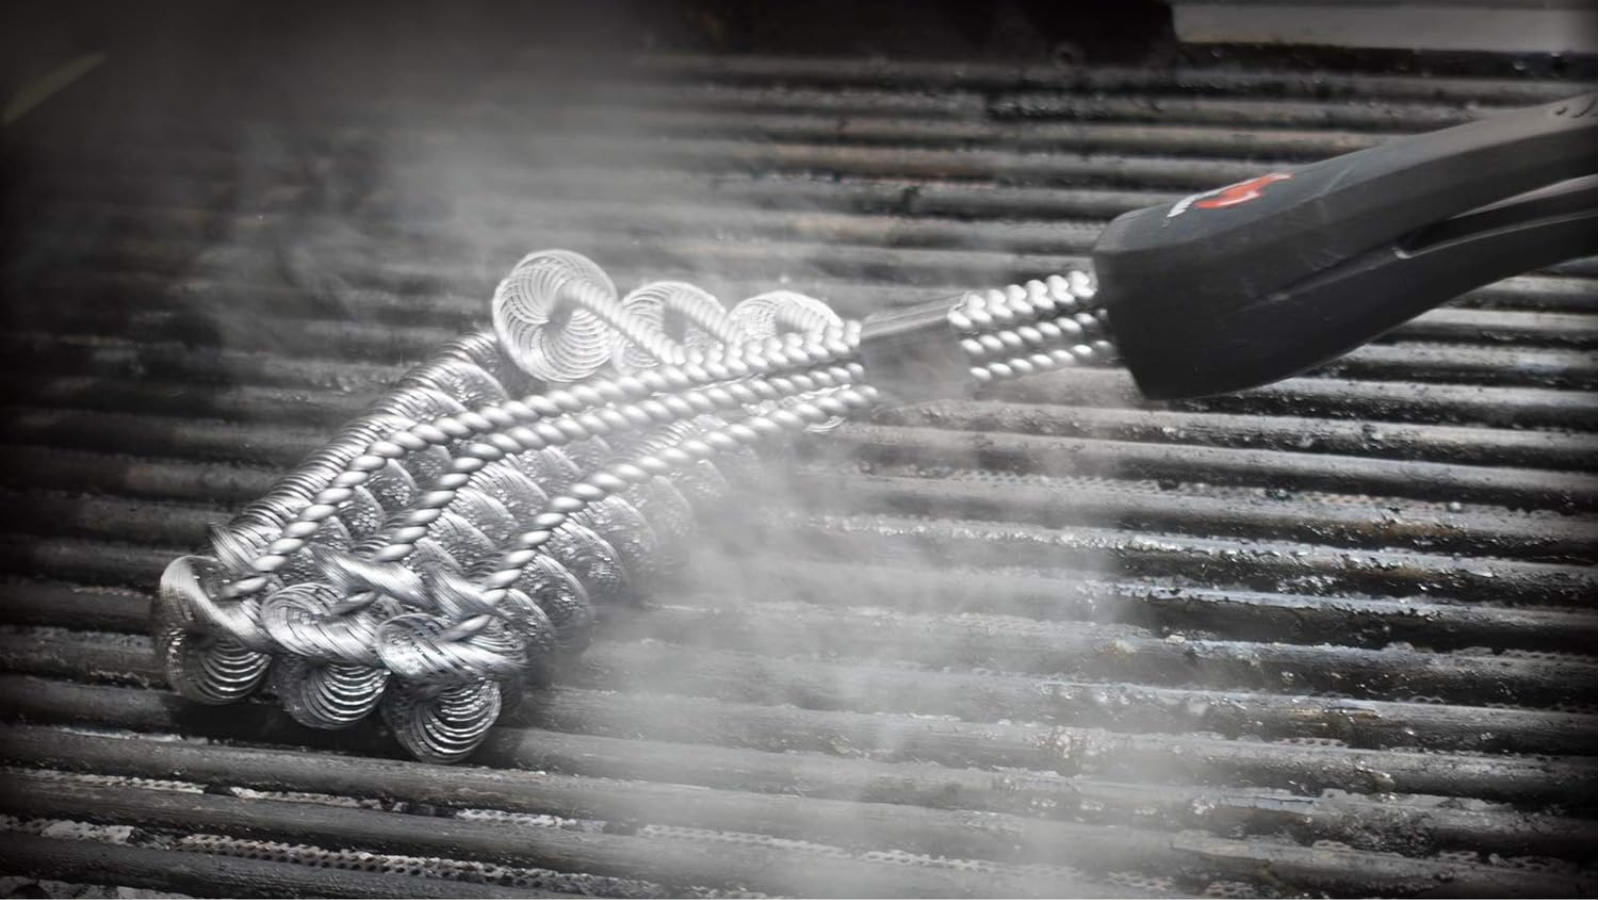 This bristle-free grill brush is a 'grate' deal at over 60% off — get it for $21